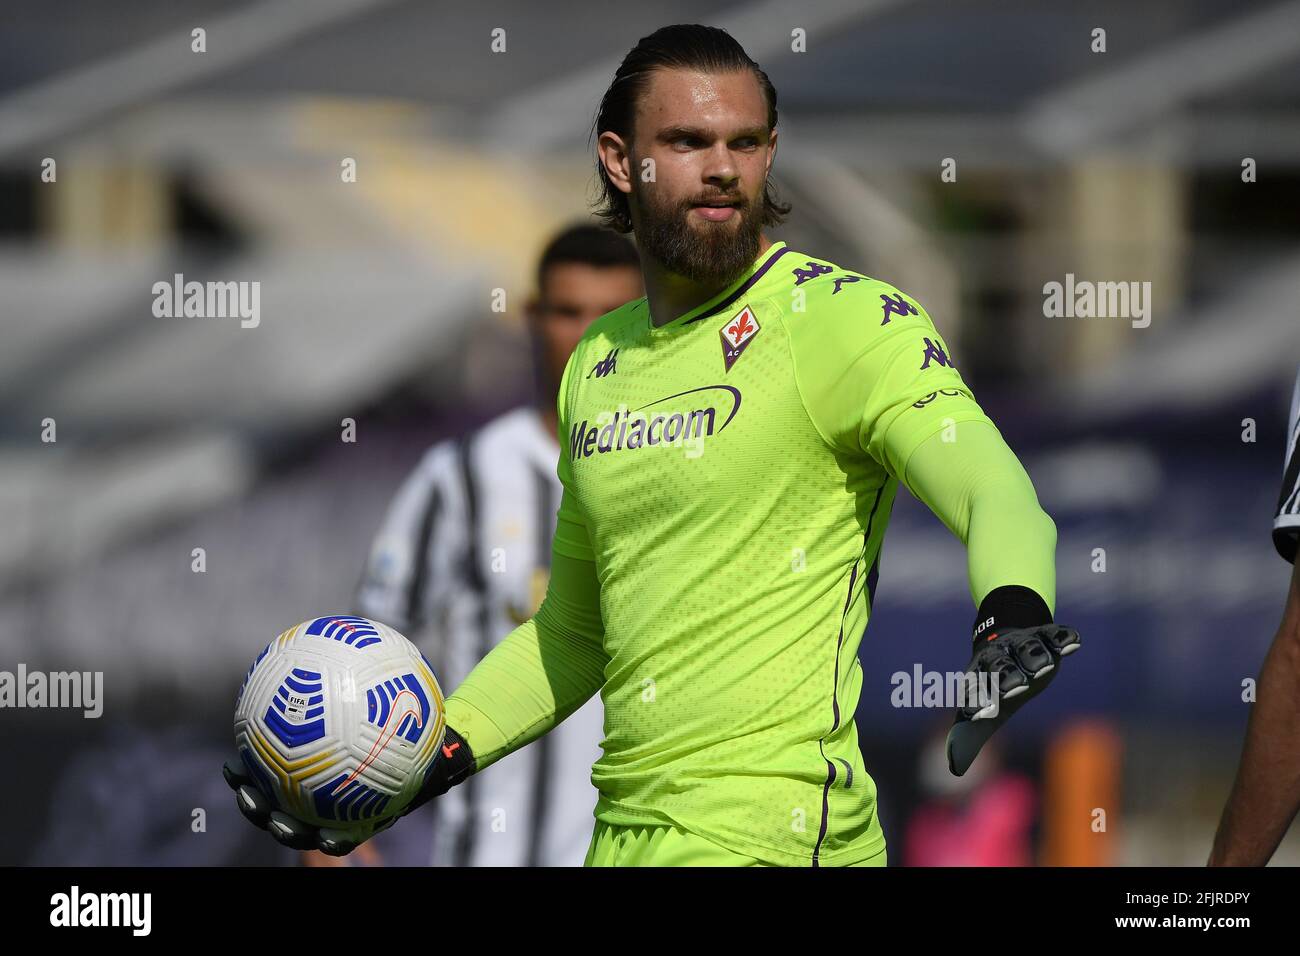 Florence, Italy. 25th Apr, 2021. Bartlomiej Dragowski of ACF Fiorentina reacts during the Serie A football match between ACF Fiorentina and Juventus FC at Artemio Franchi stadium in Firenze (Italy), April 25th, 2021. Photo Andrea Staccioli/Insidefoto Credit: insidefoto srl/Alamy Live News Stock Photo